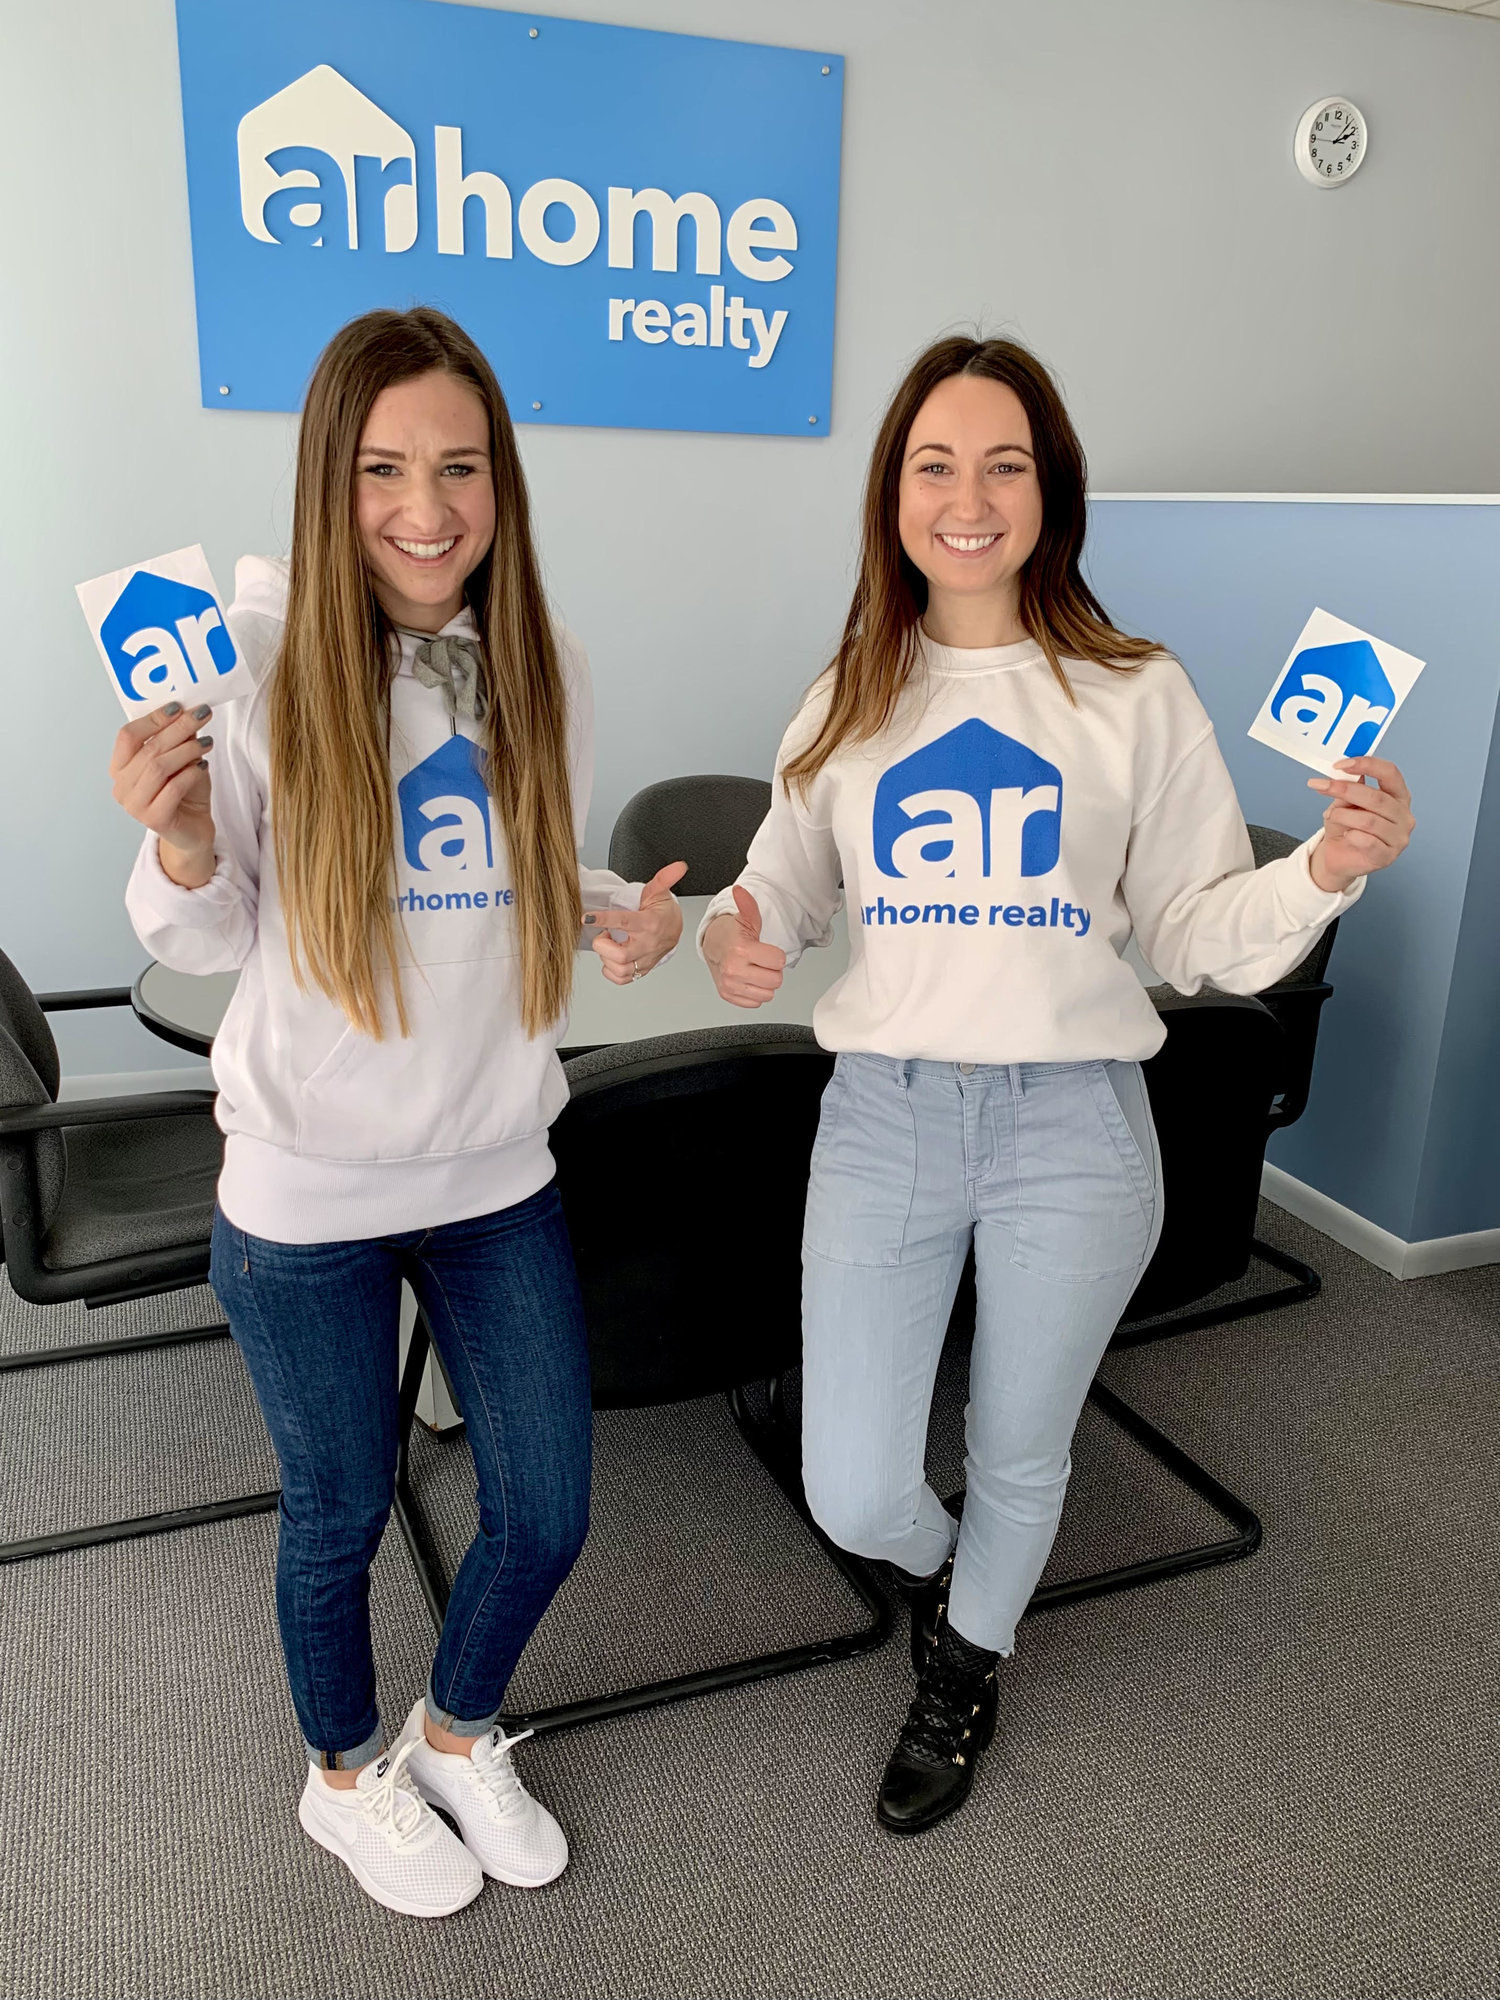 two women standing in ar logo sweaters with ar logo stickers in front of the arhome realty sign